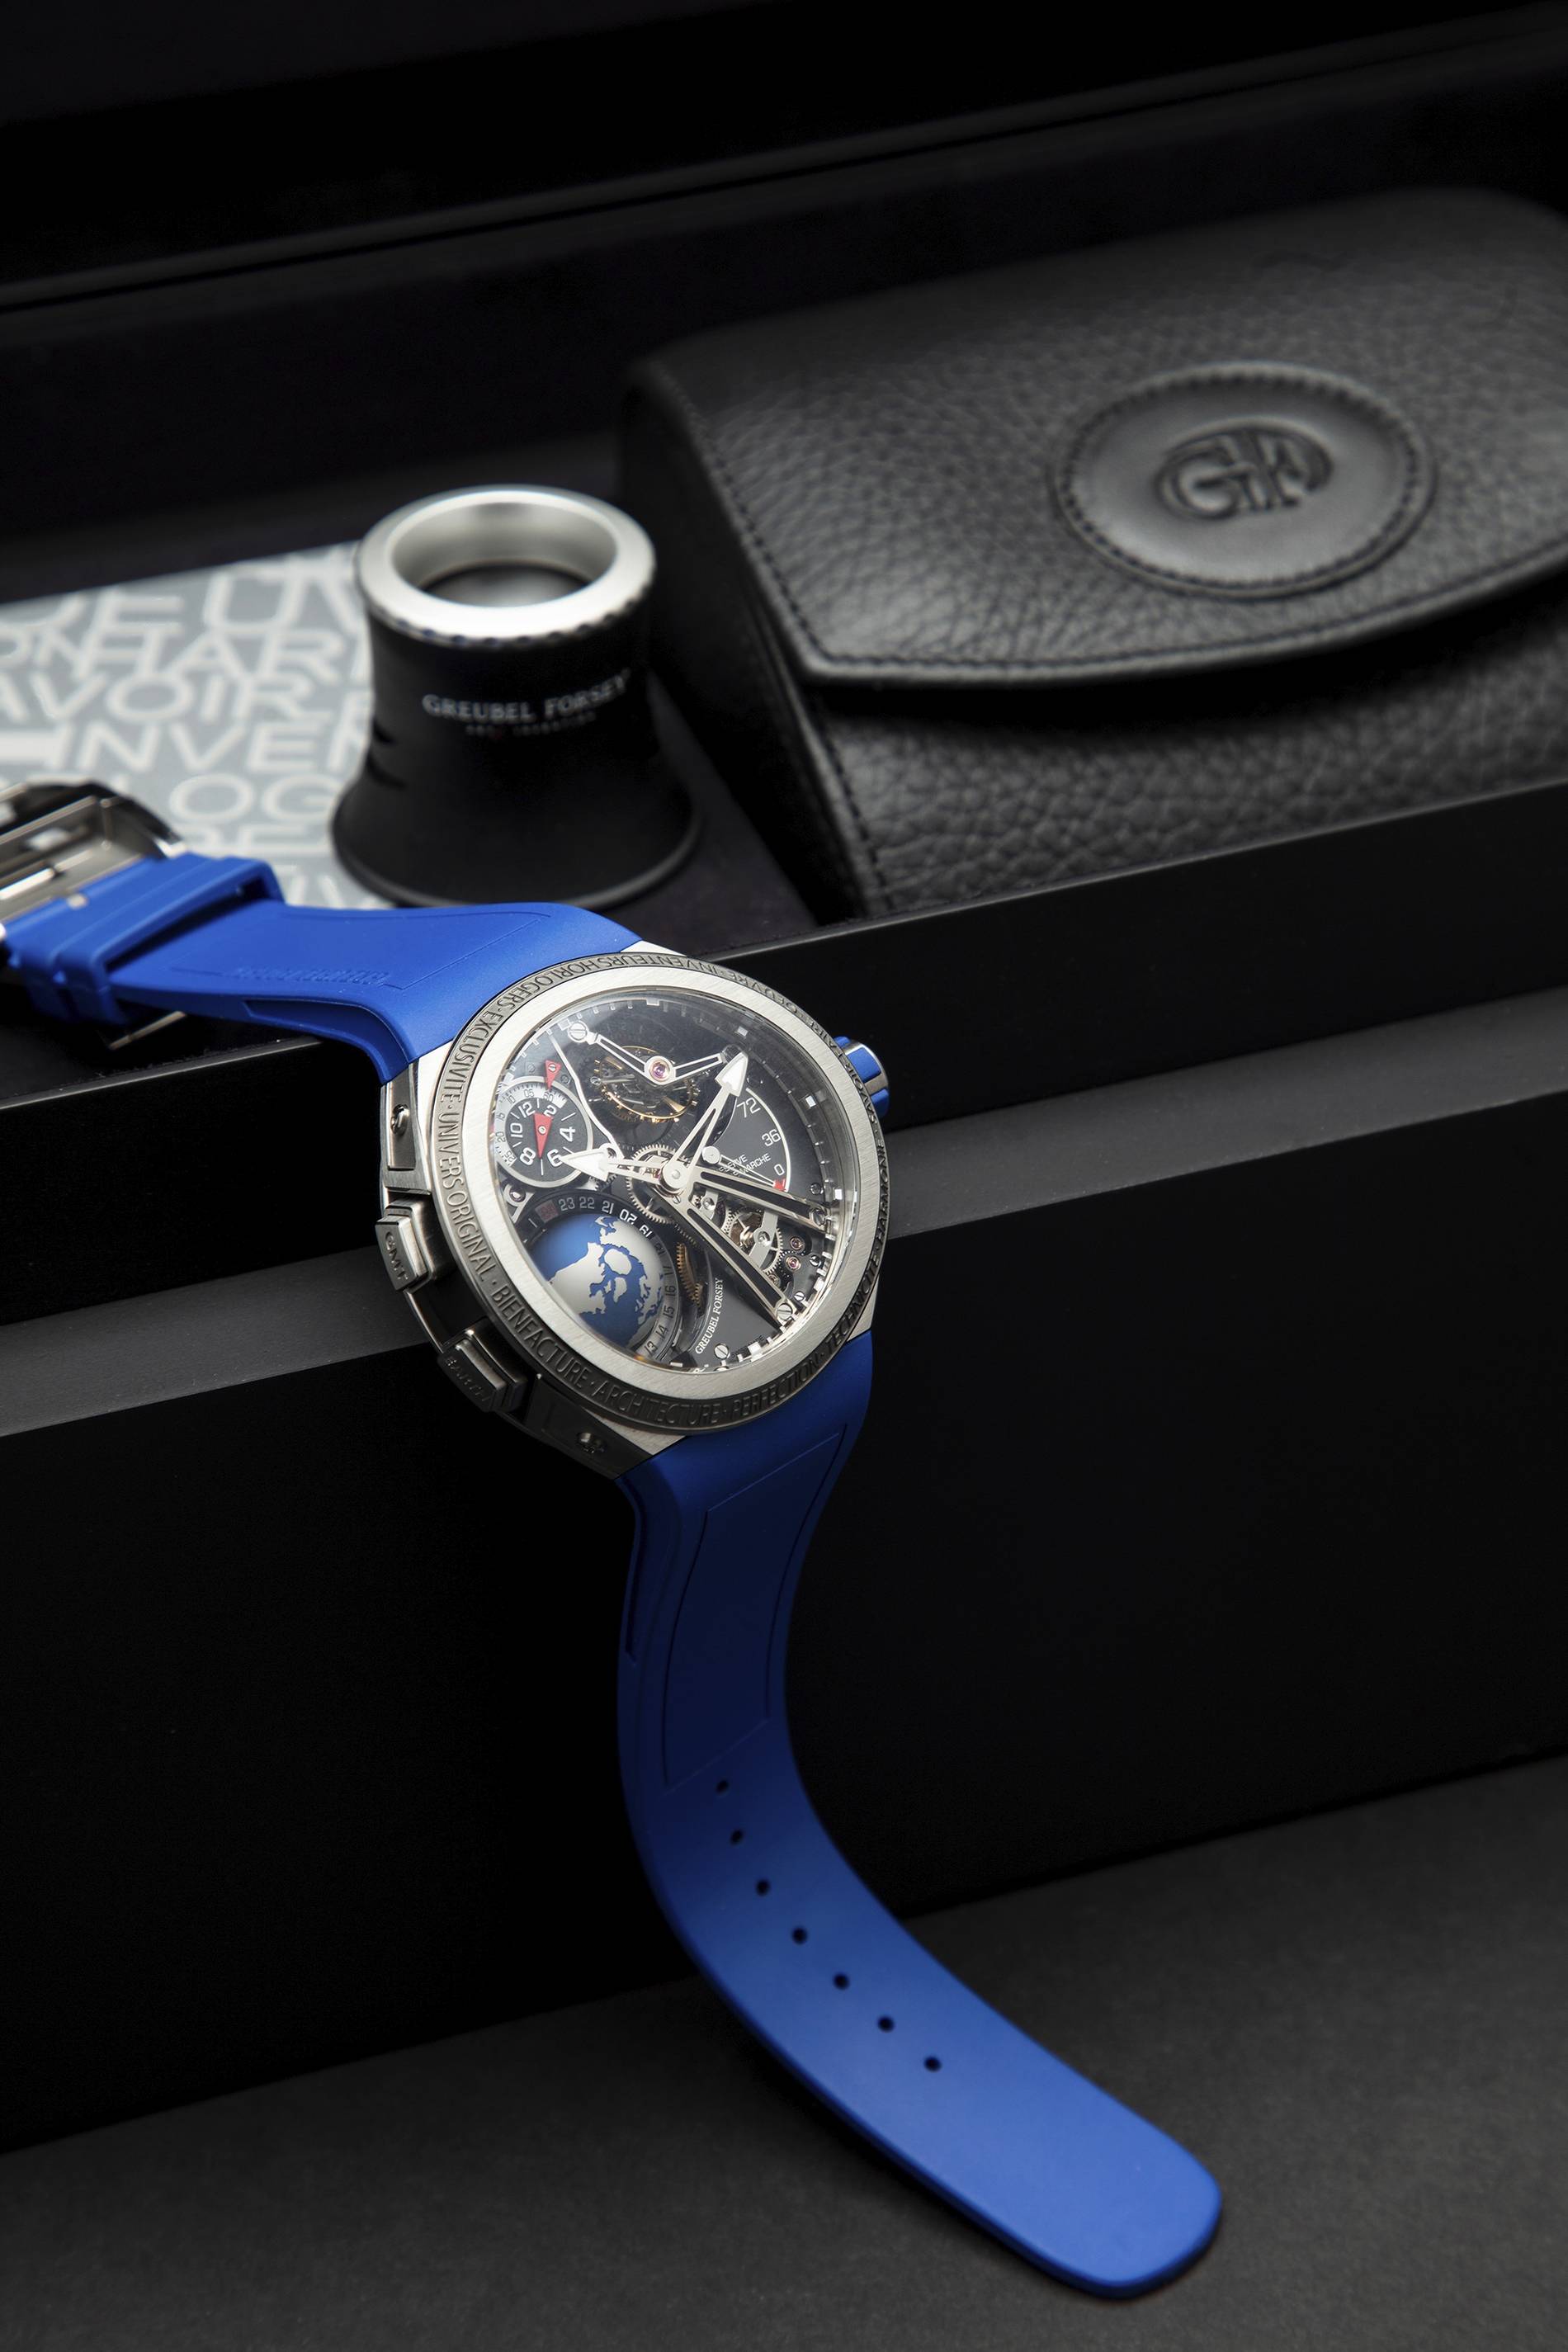 Greubel Forsey GMT Sports watch in blue